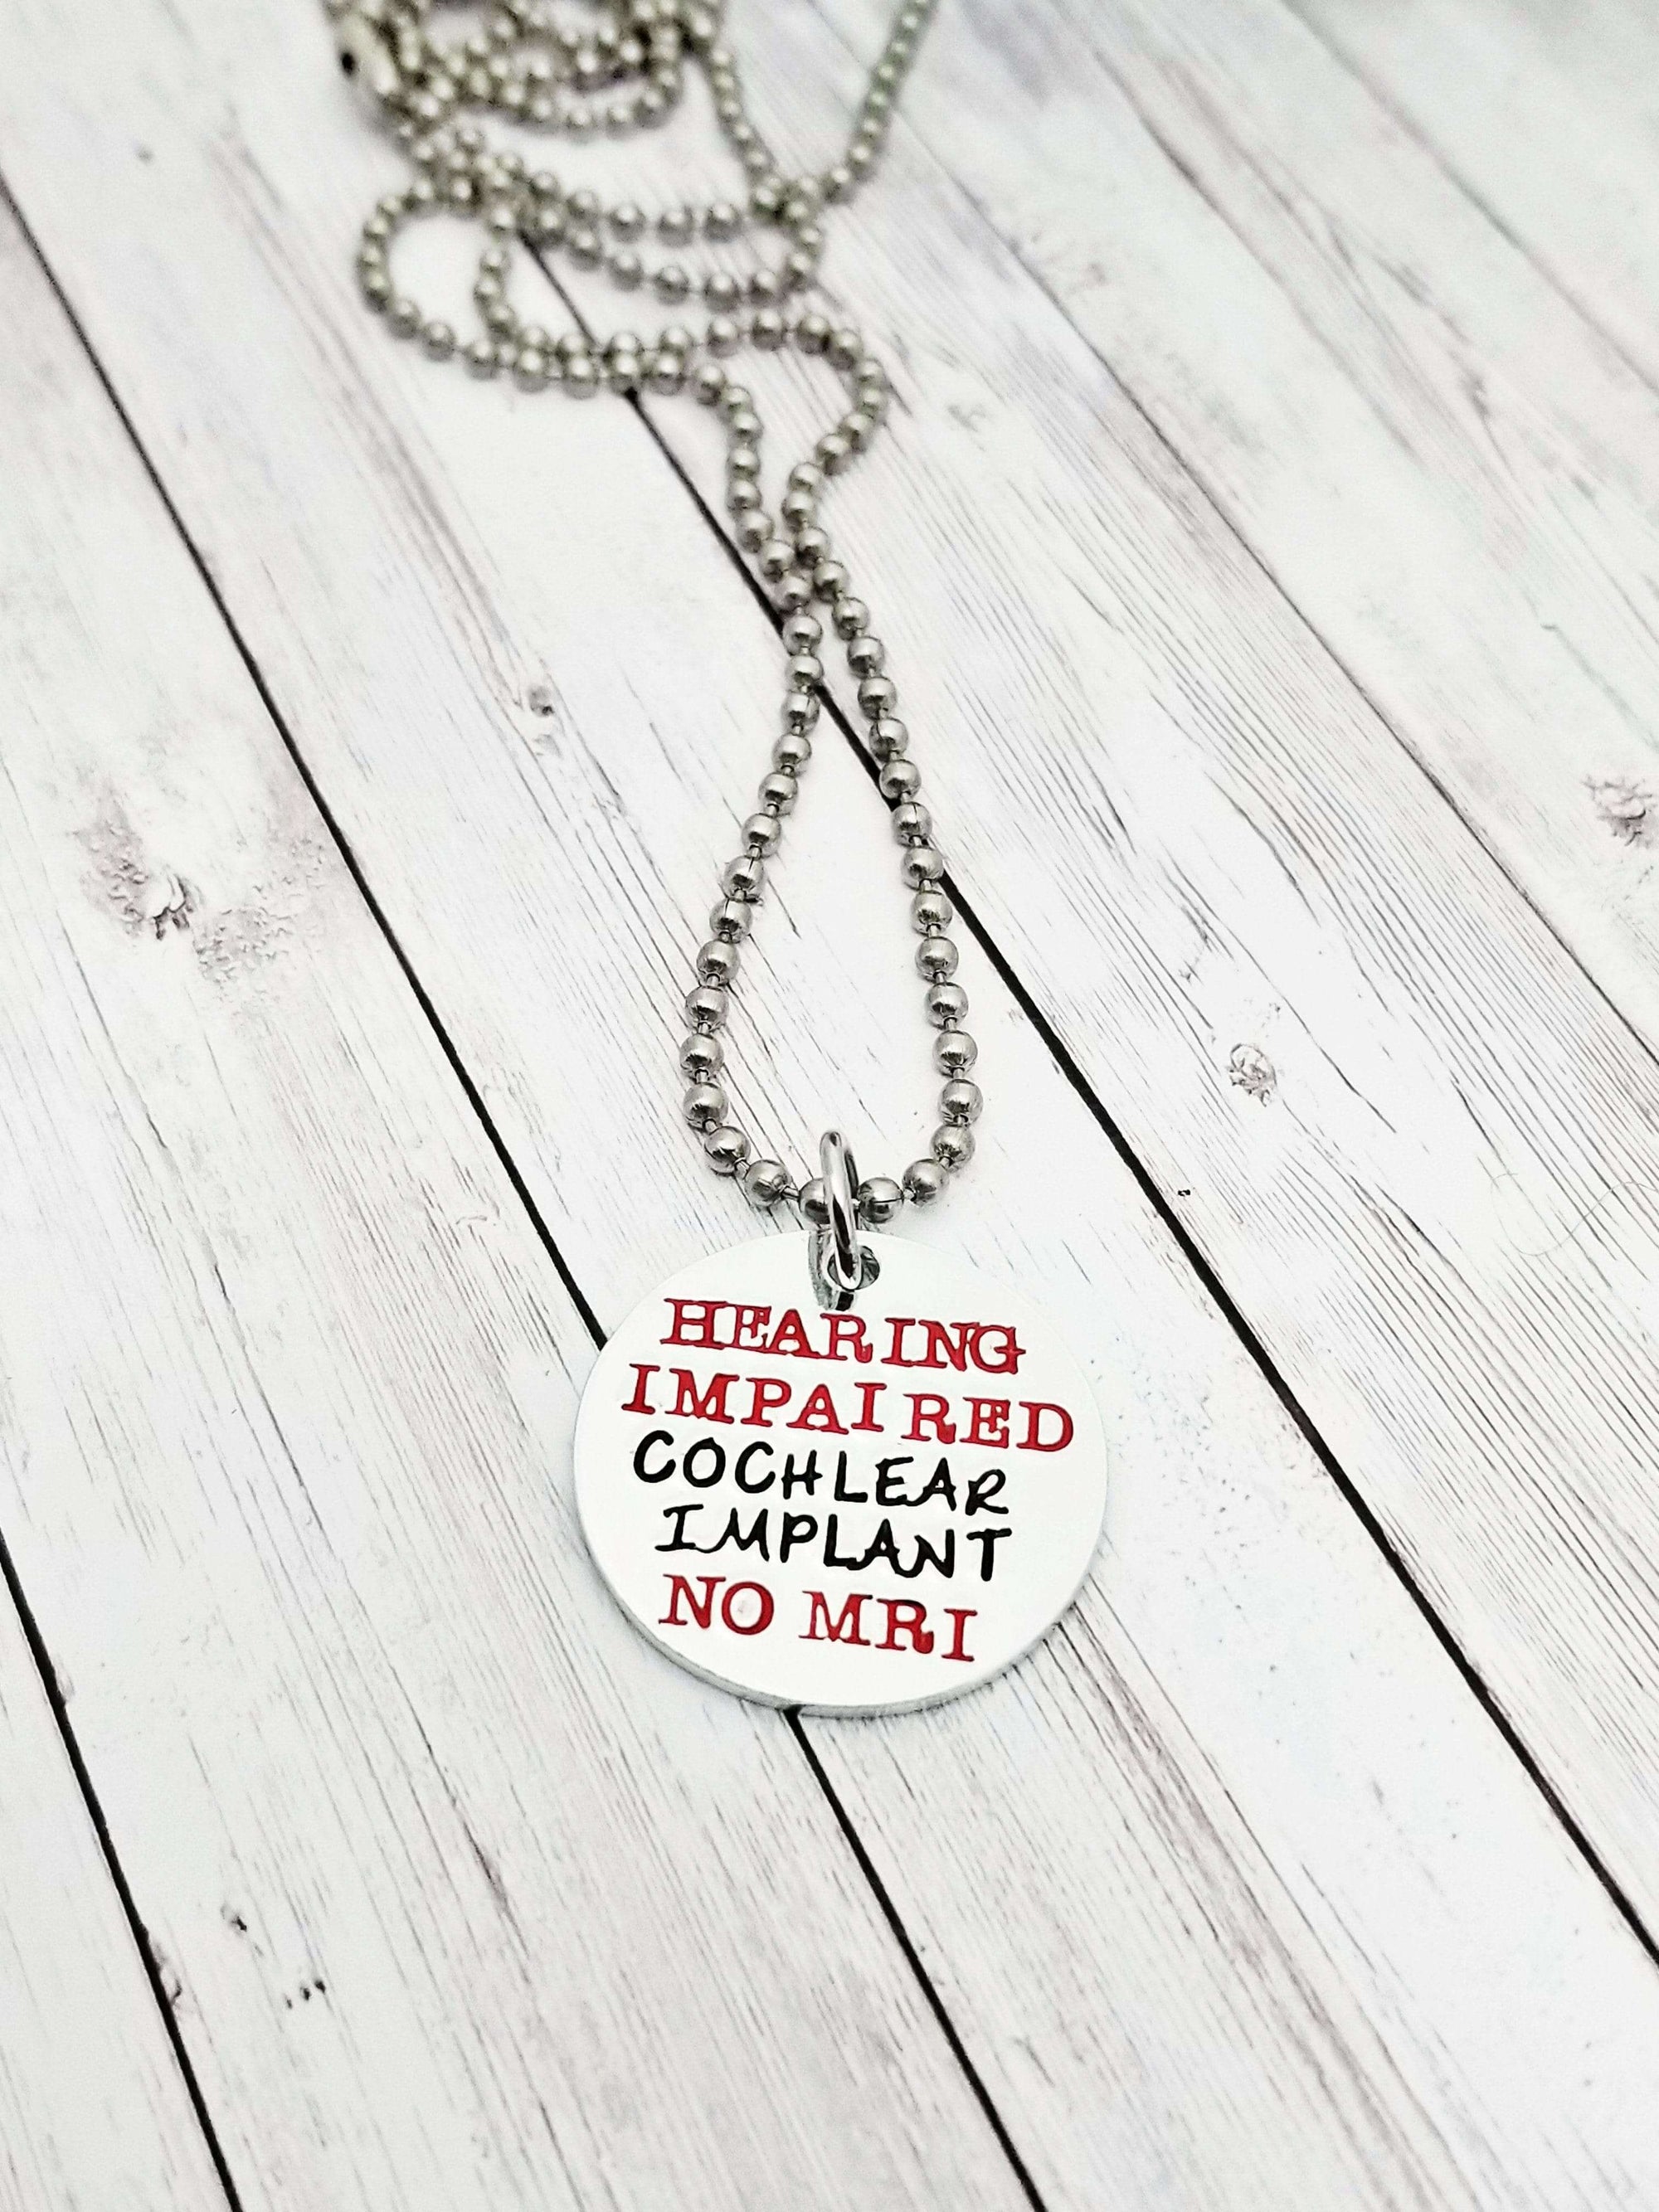 Hearing Impaired Necklace, Hearing Impaired Medical Alert, Cochlear Implant, Medical Alert, Implant